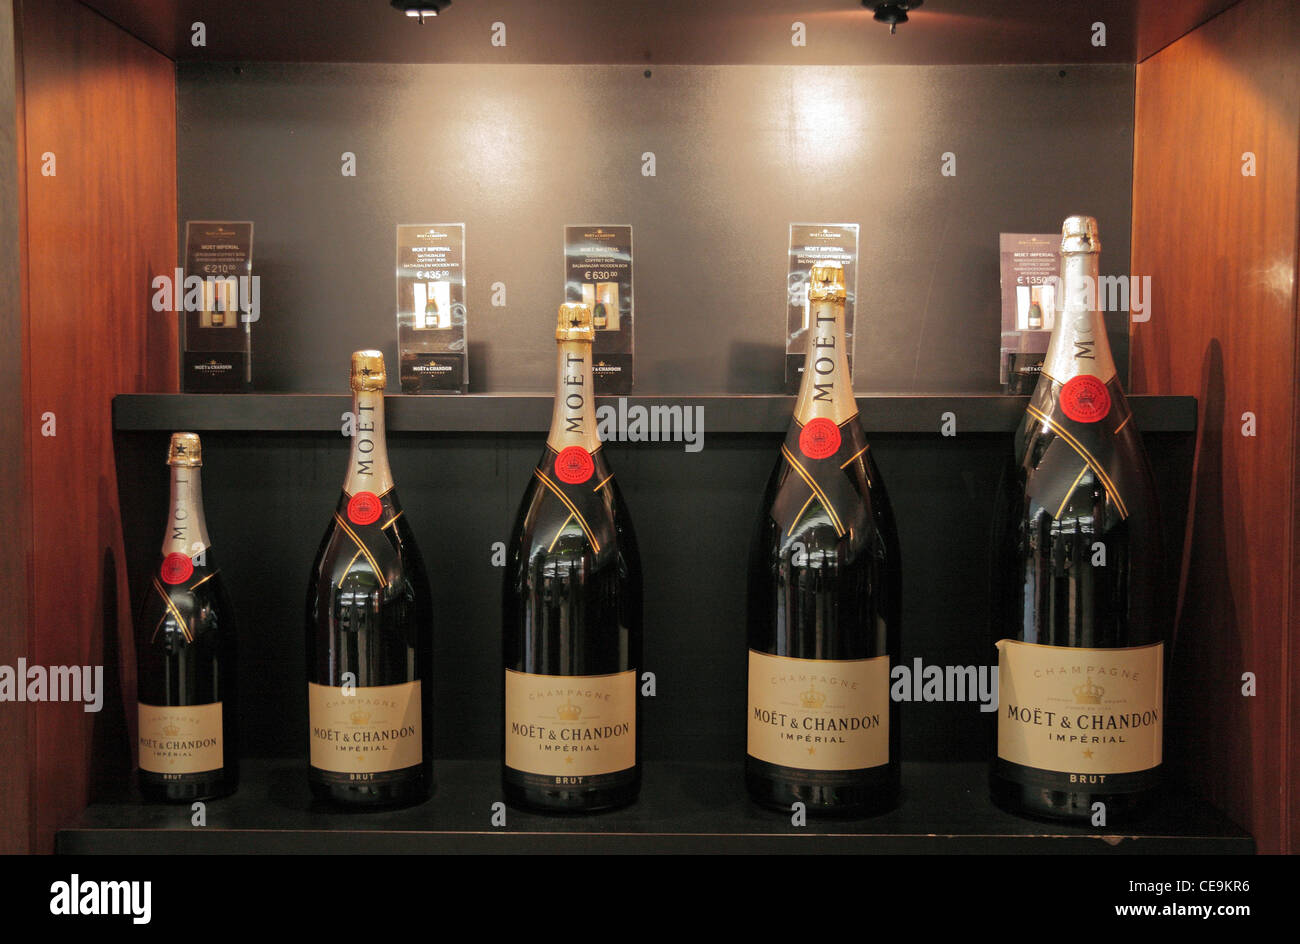 The Moet et Chandon Imperial Champagne range on display at the Moet ...